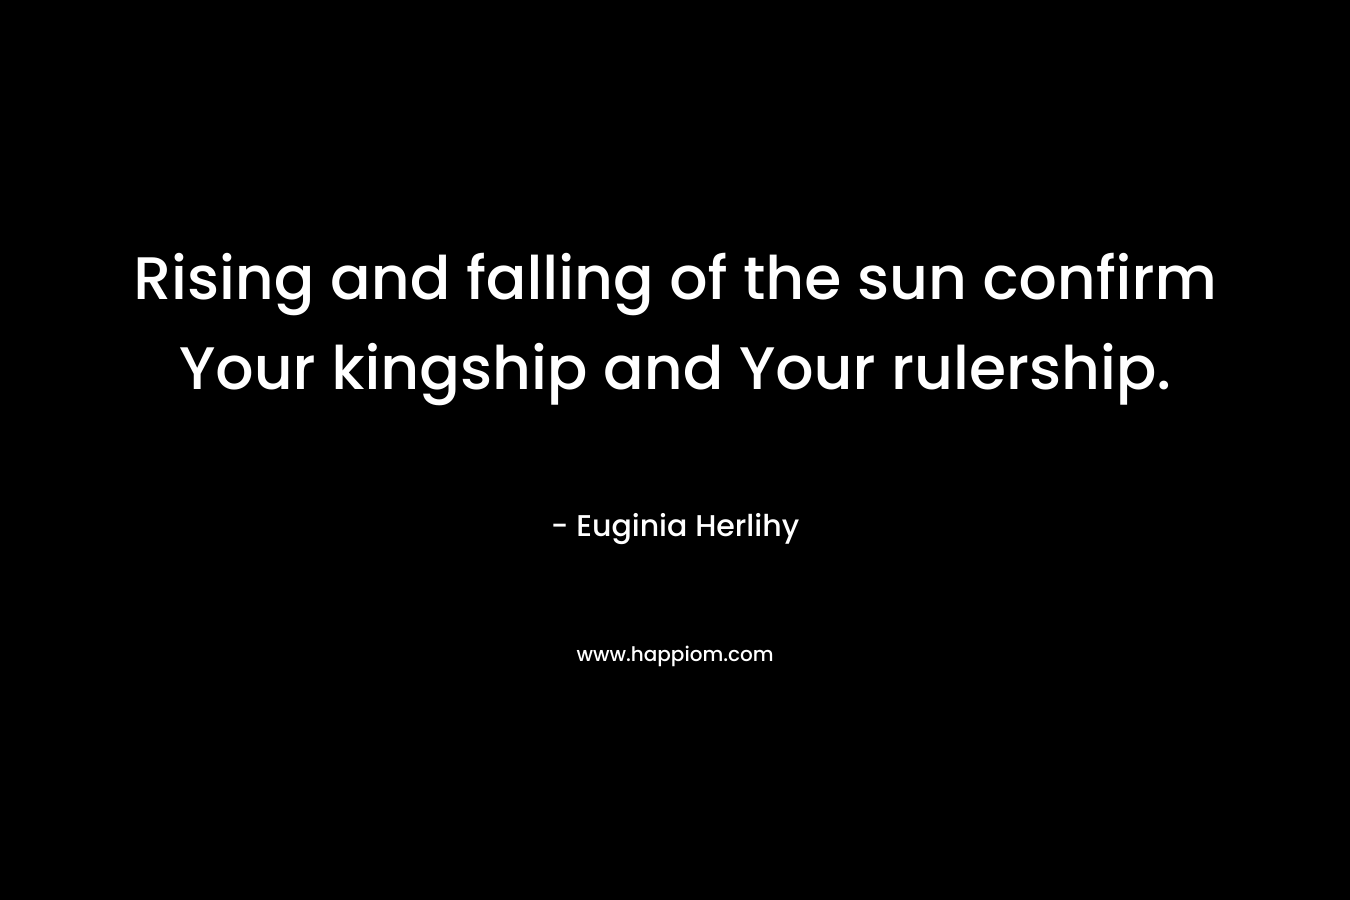 Rising and falling of the sun confirm Your kingship and Your rulership. – Euginia Herlihy